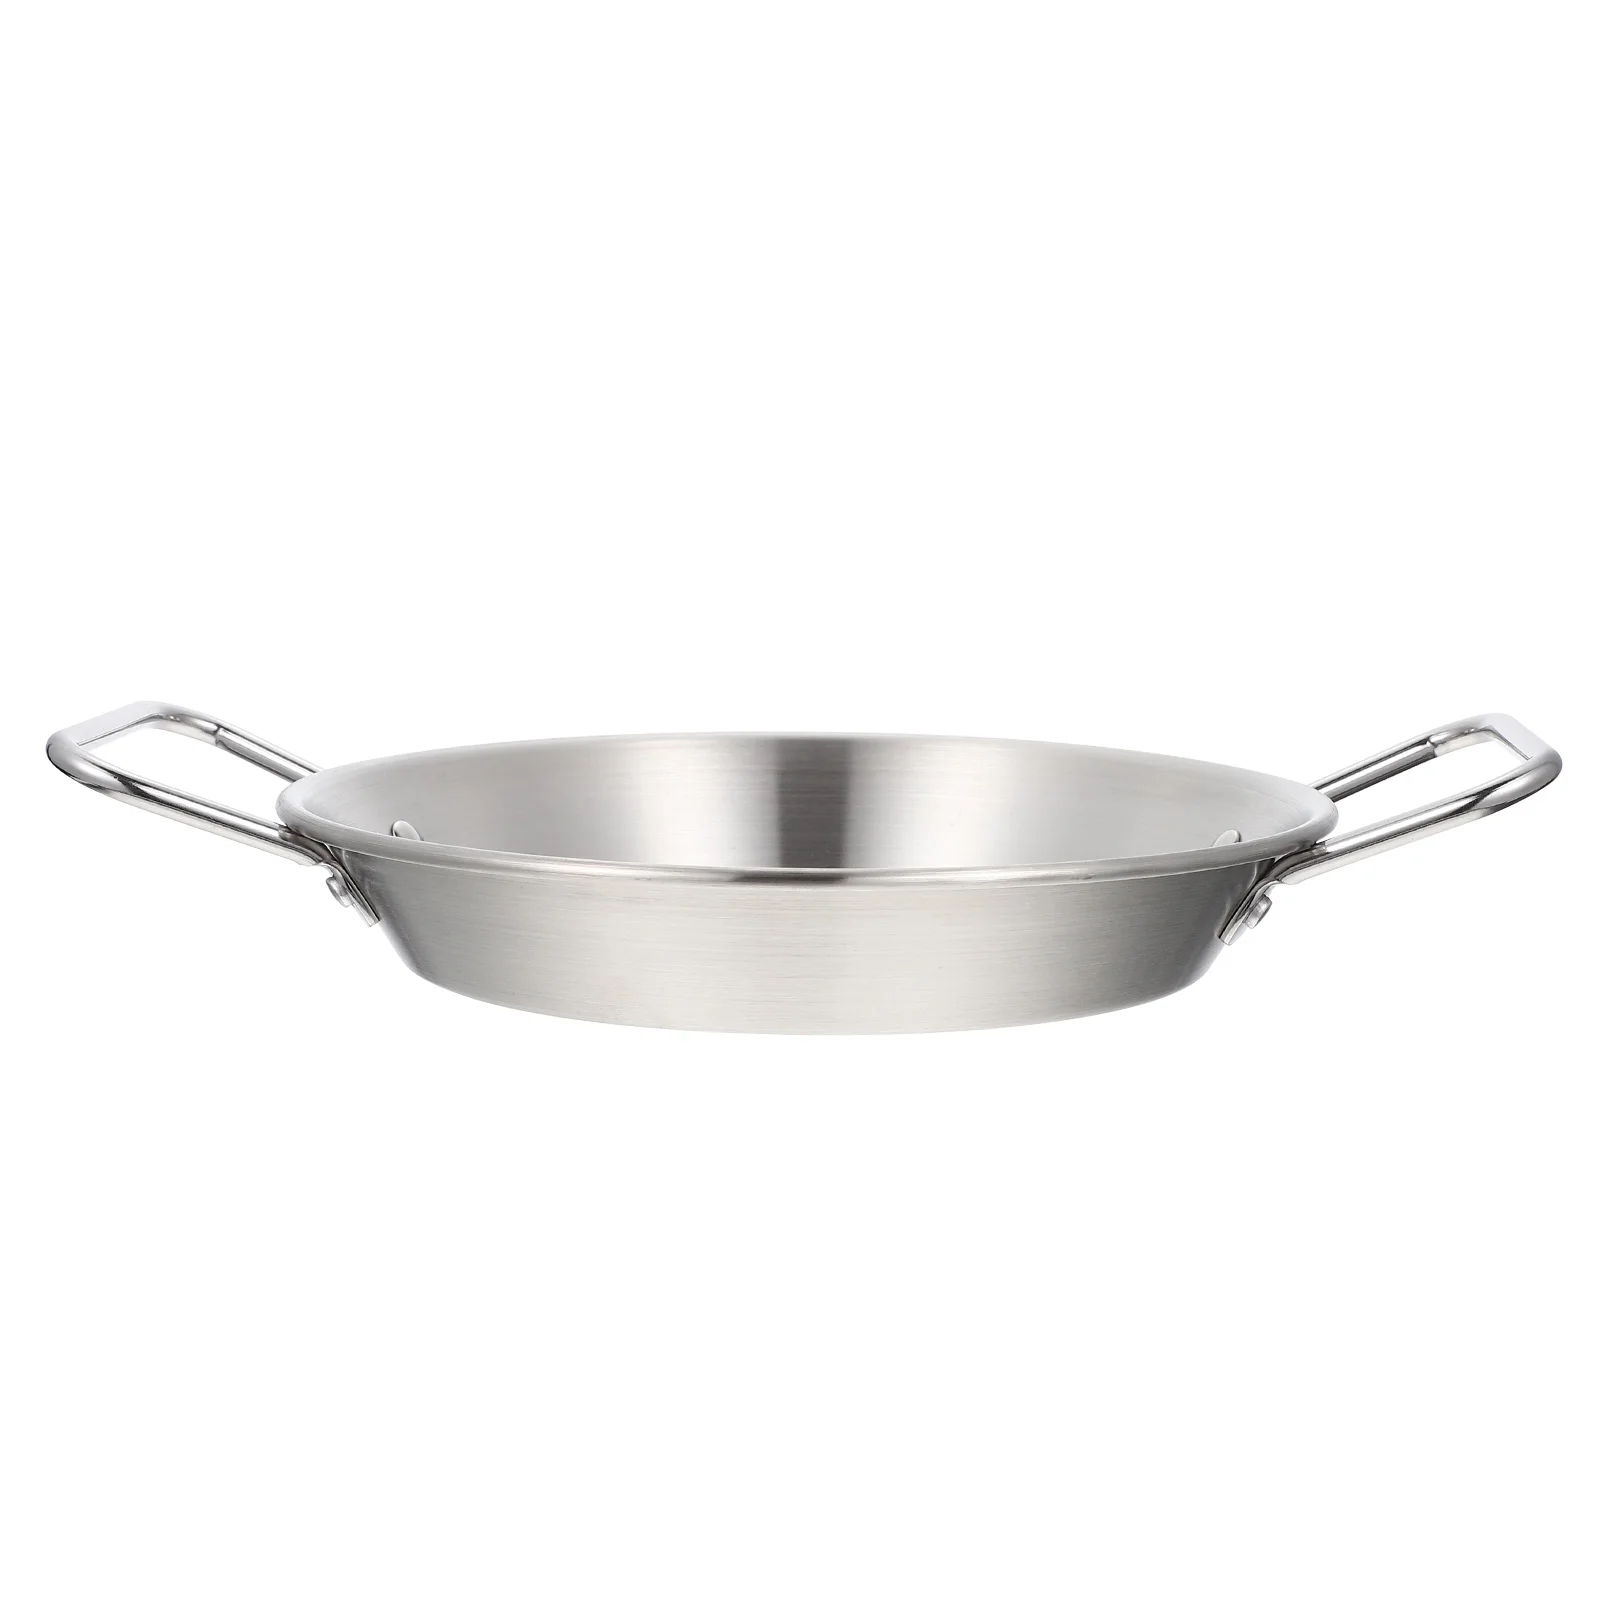 

Pan Stainless Steel Paella Bowl Skillet Serving Pot Plate Wok Stick Tray Snacknon Seafood Platter Frying Fried Omelet Metalpans